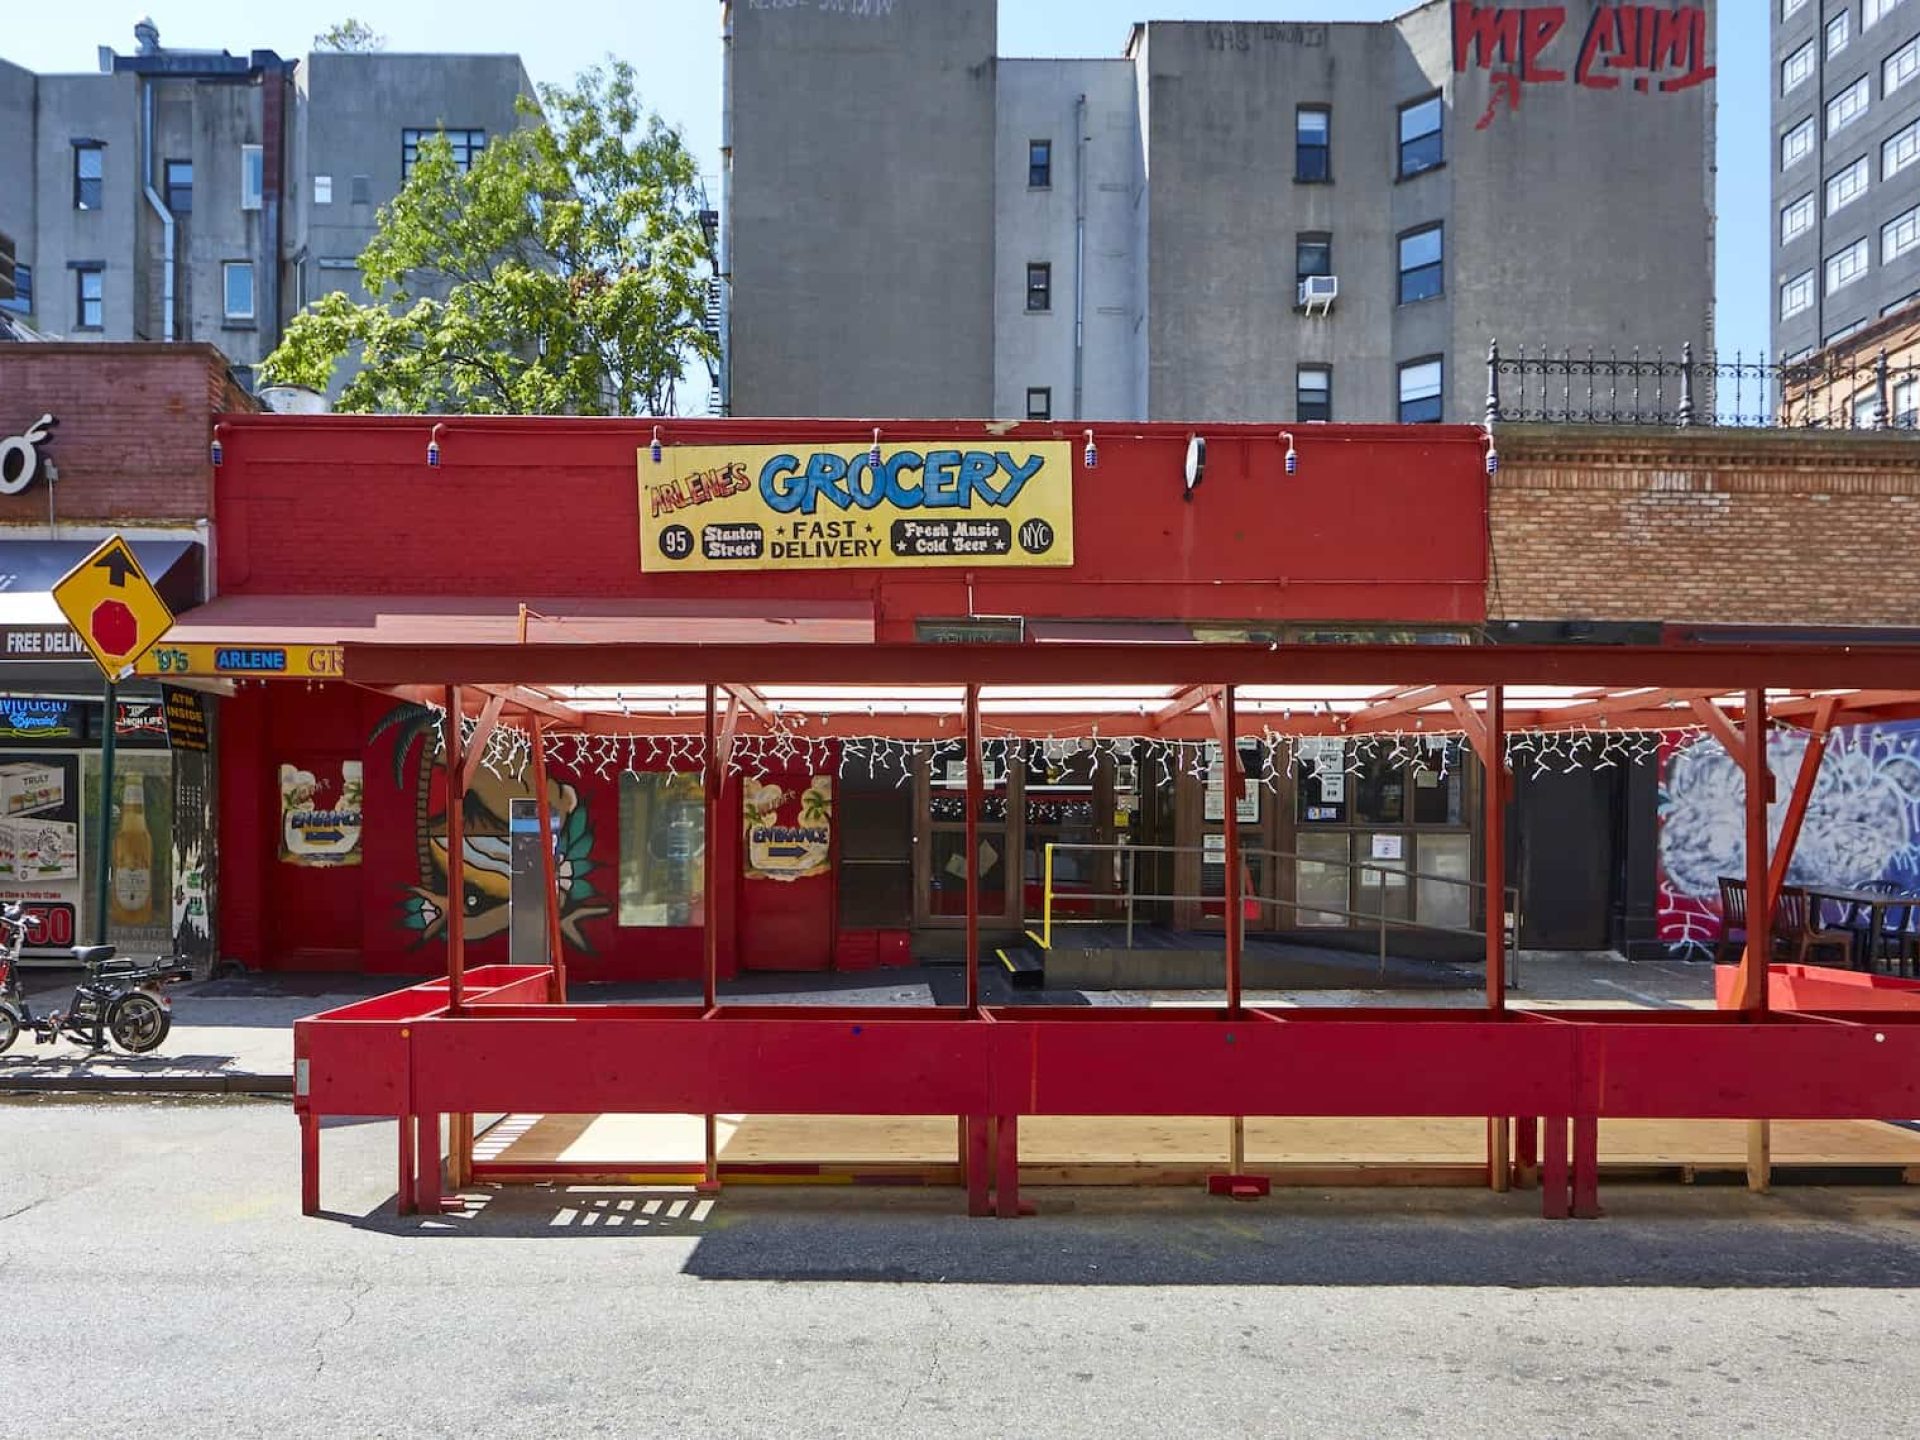 Street view of Arlene's Grocery with a ramp to entry, red painted exterior, and covered outdoor space with string lights.